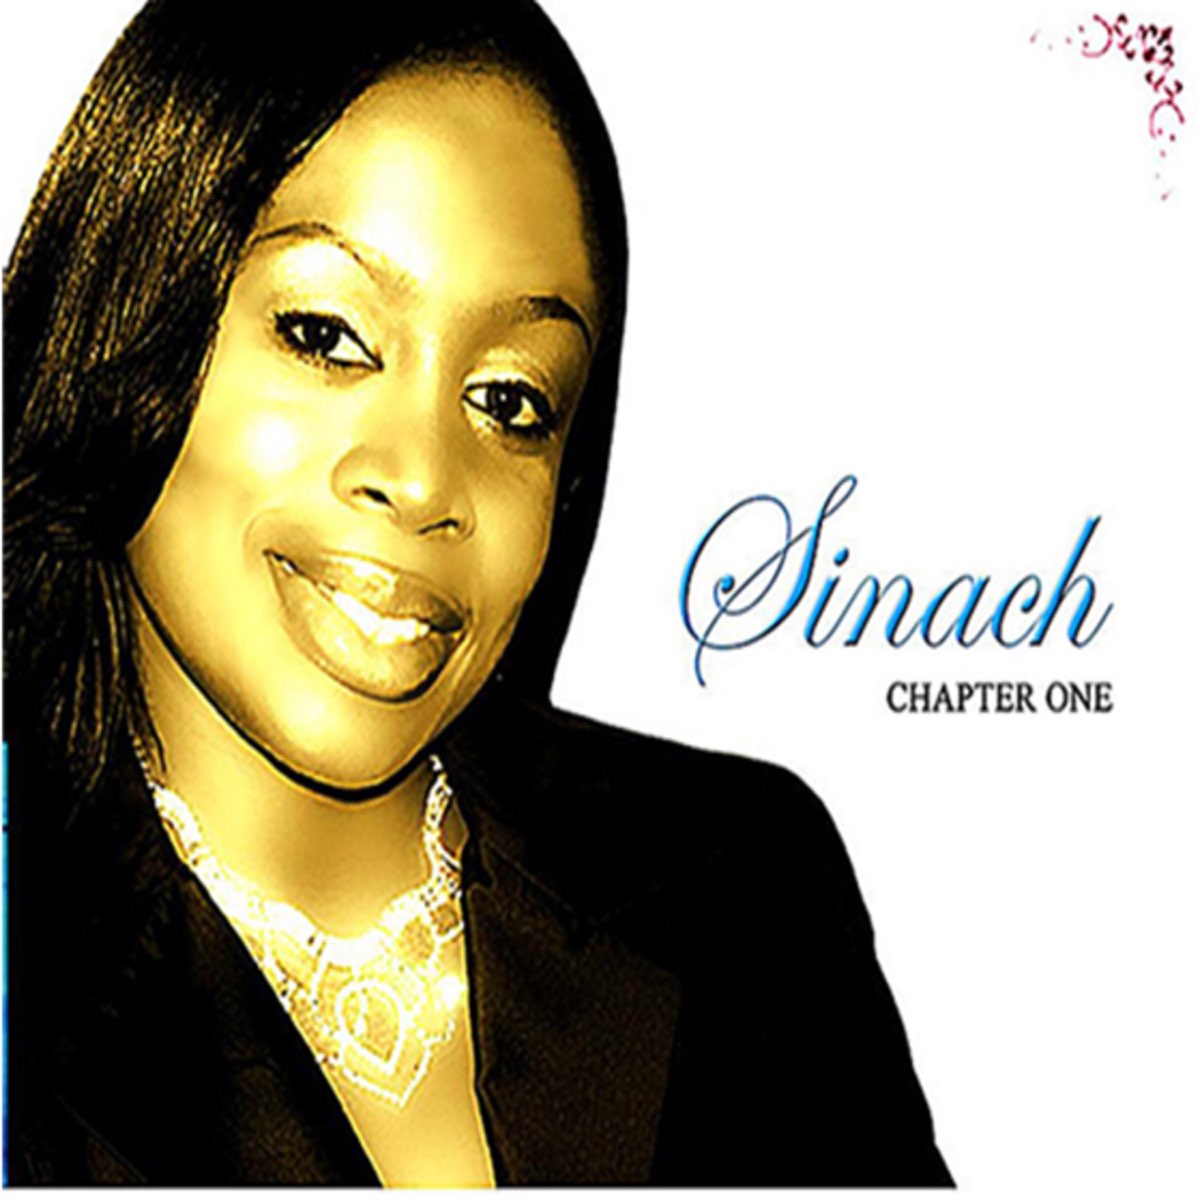 Chapter One by Sinach | Album